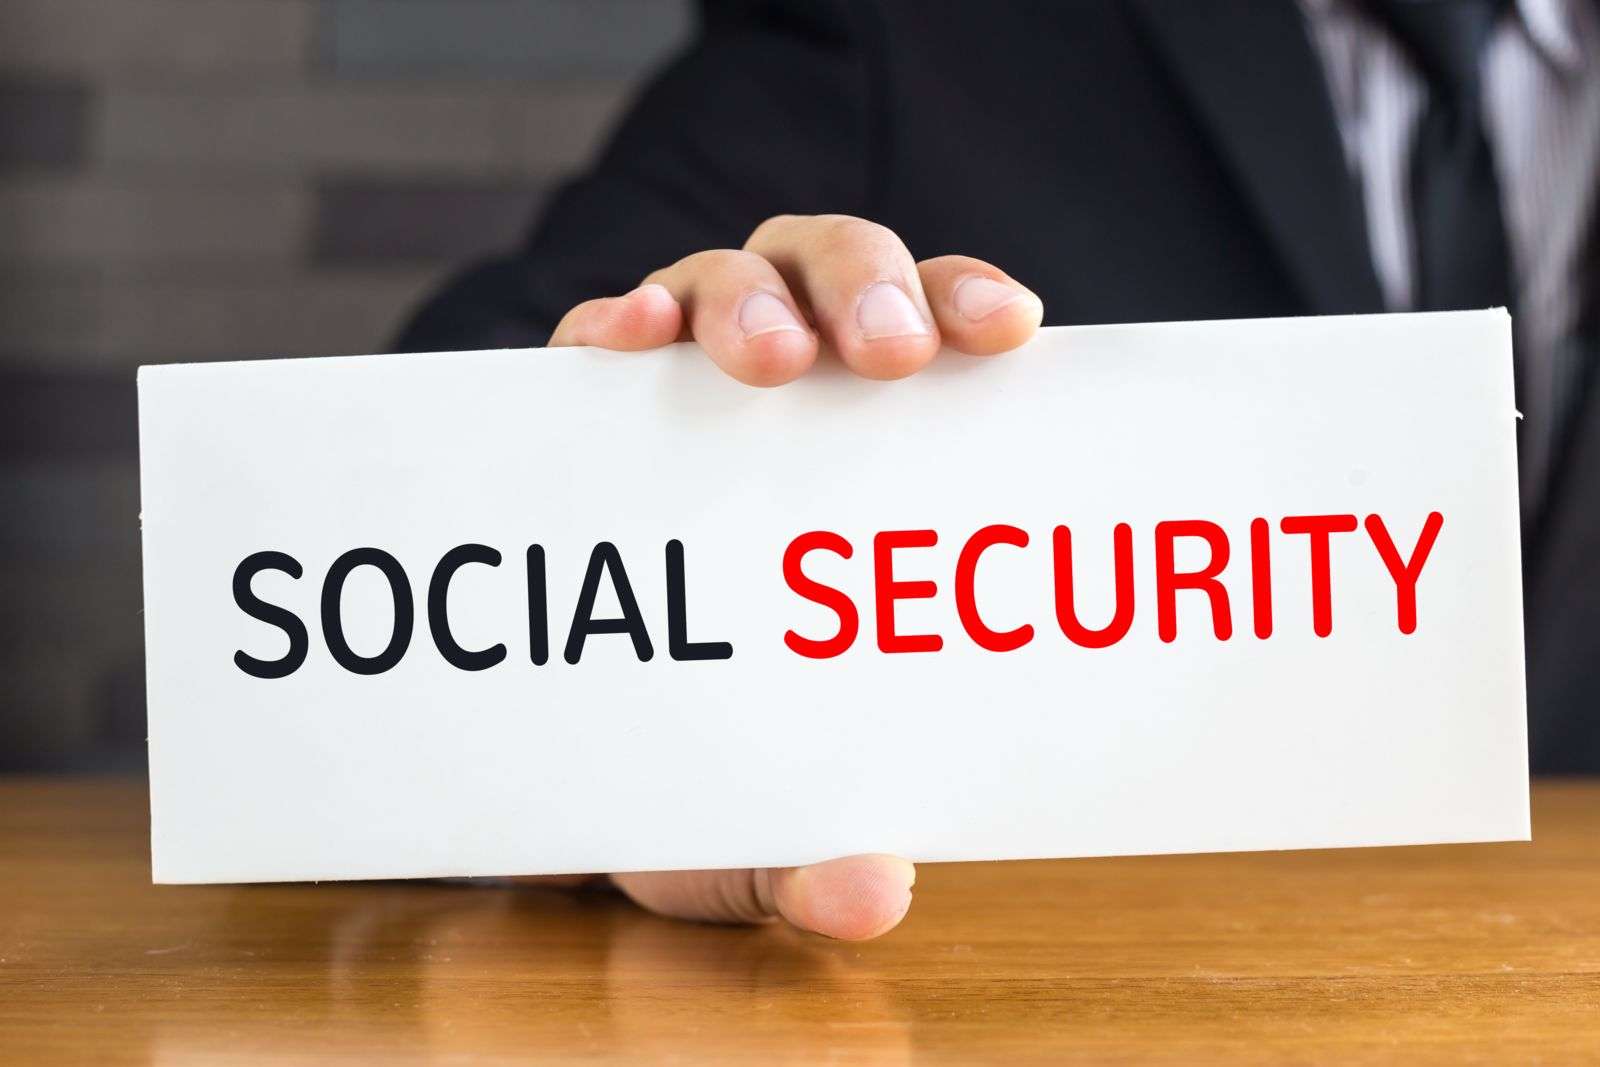 Can I Receive Social Security and Unemployment?